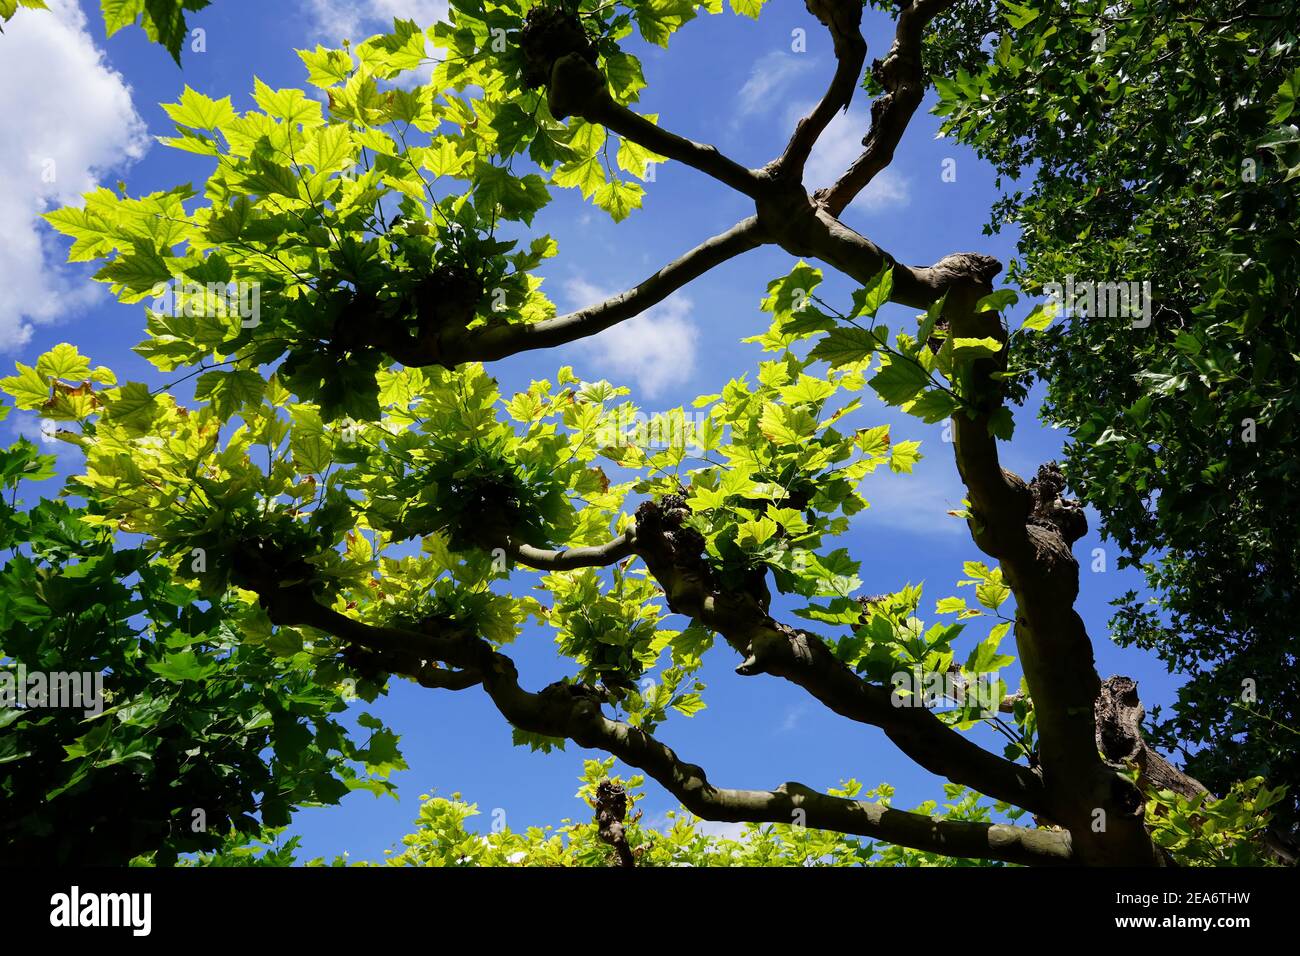 Old plane tree with green leaves on a sunny day, seen from a worm's eye view against the sky. Stock Photo